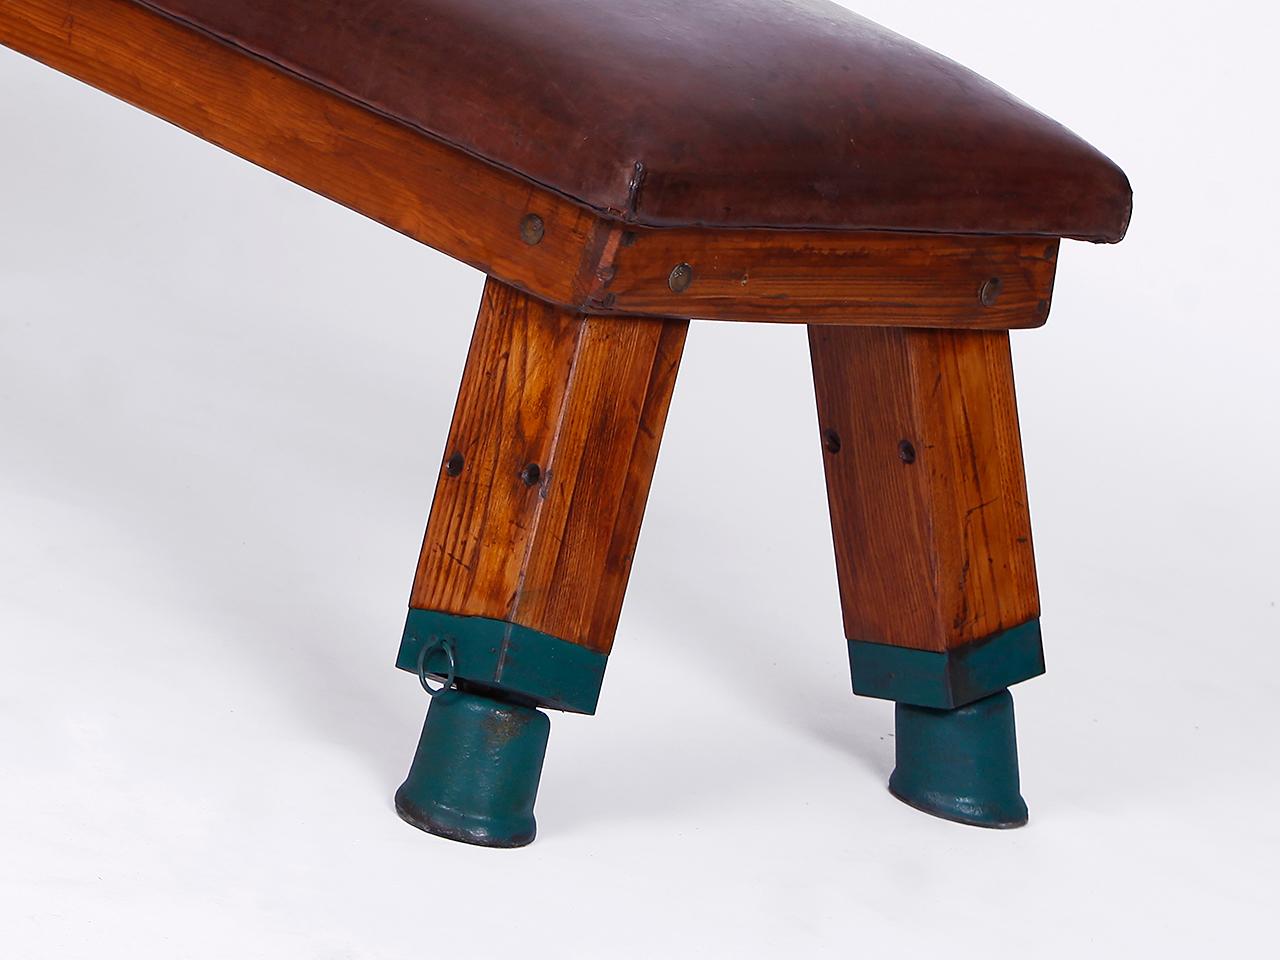 Czech Gymnastic Vintage Leather Pommel Horse Gym Bench Top, 1930s For Sale